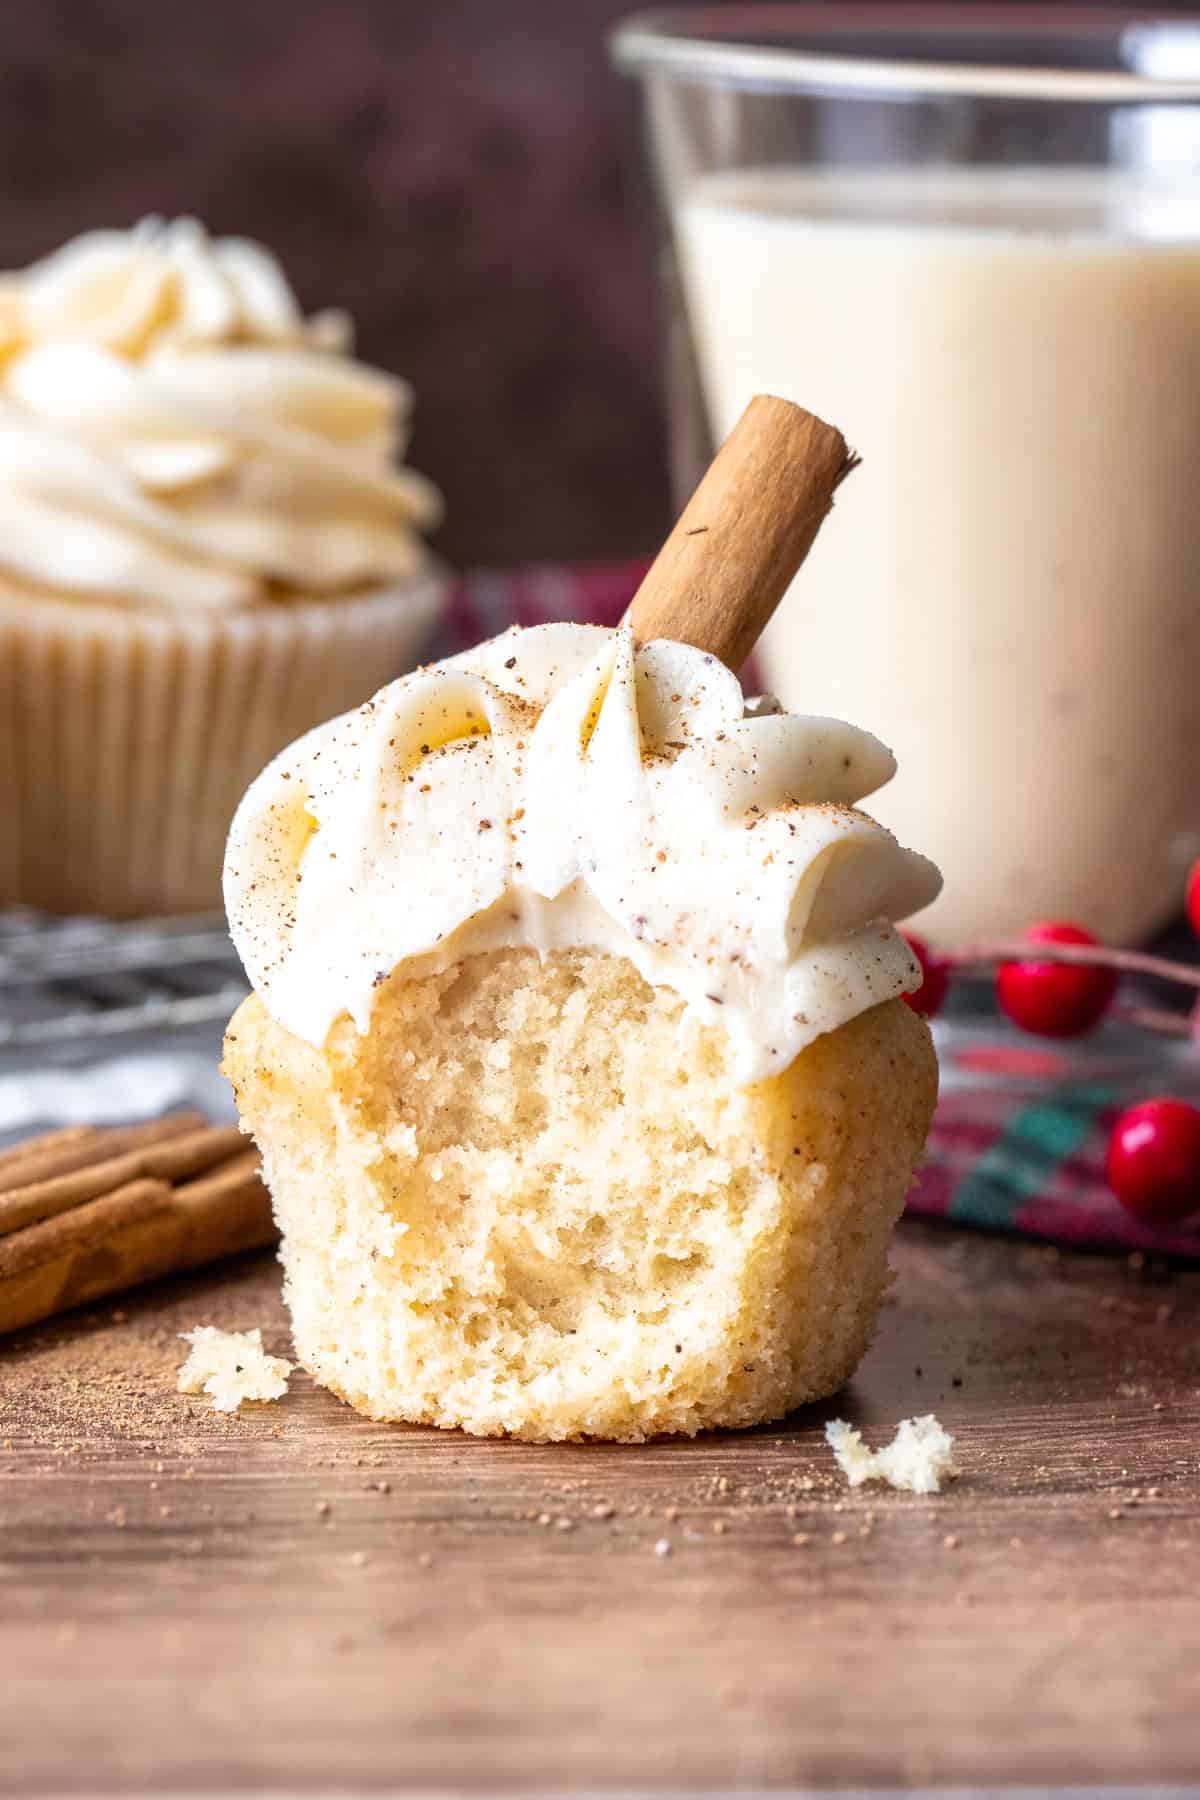 Eggnog cupcake with a bite taken out